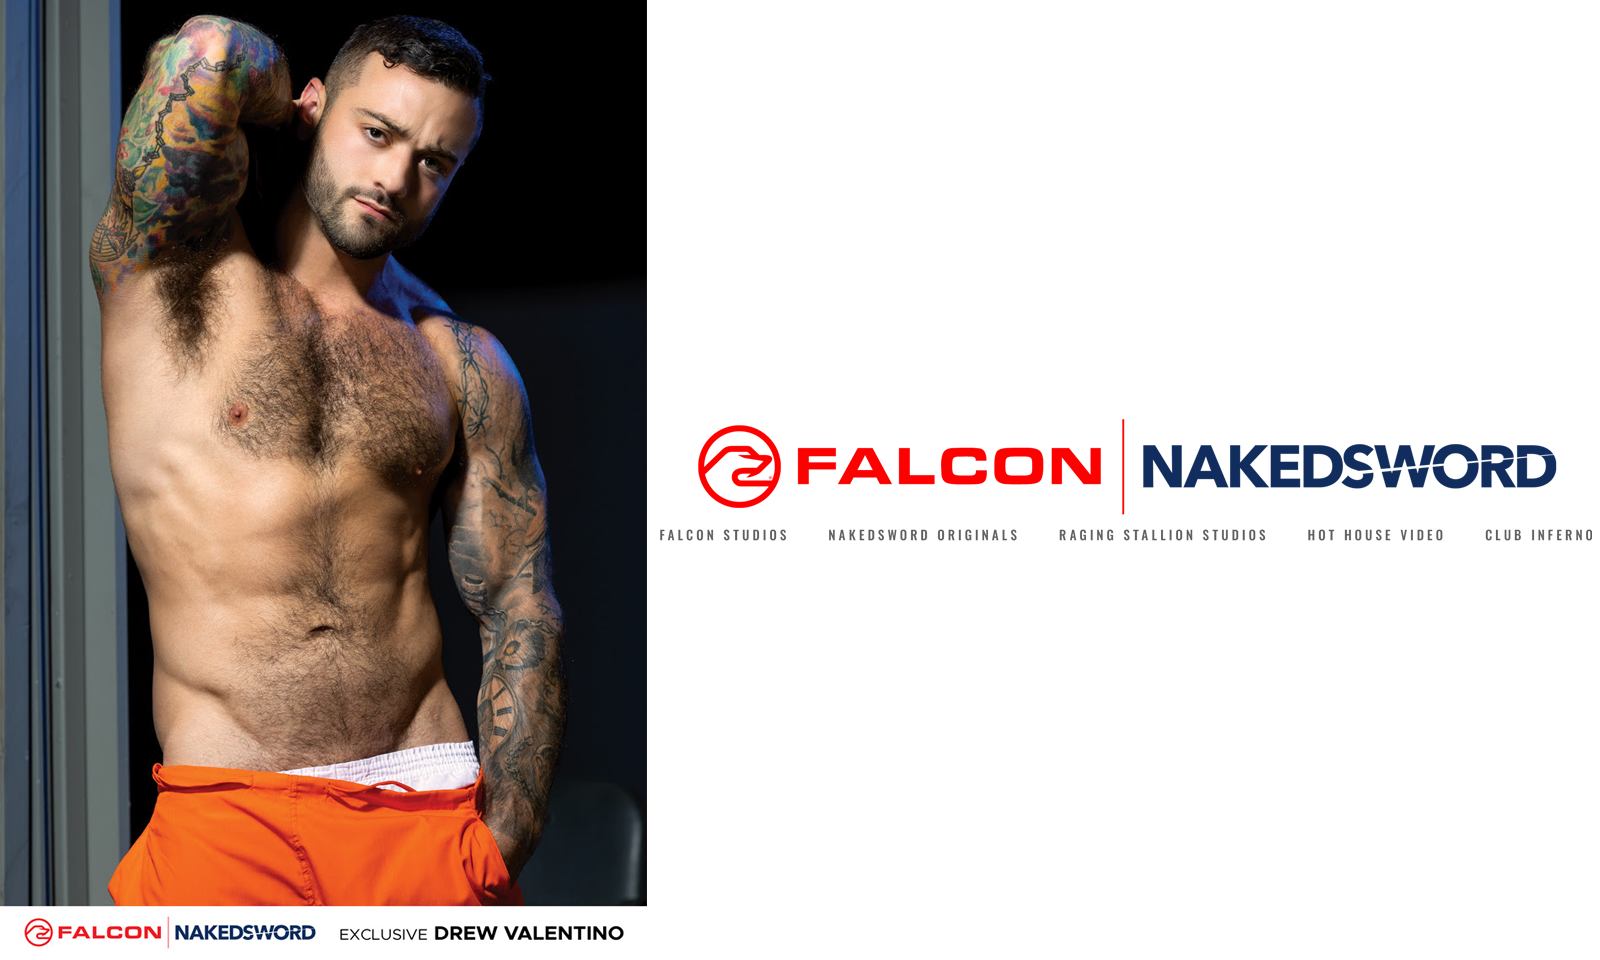 Falcon|NakedSword Signs Drew Valentino as Newest Exclusive